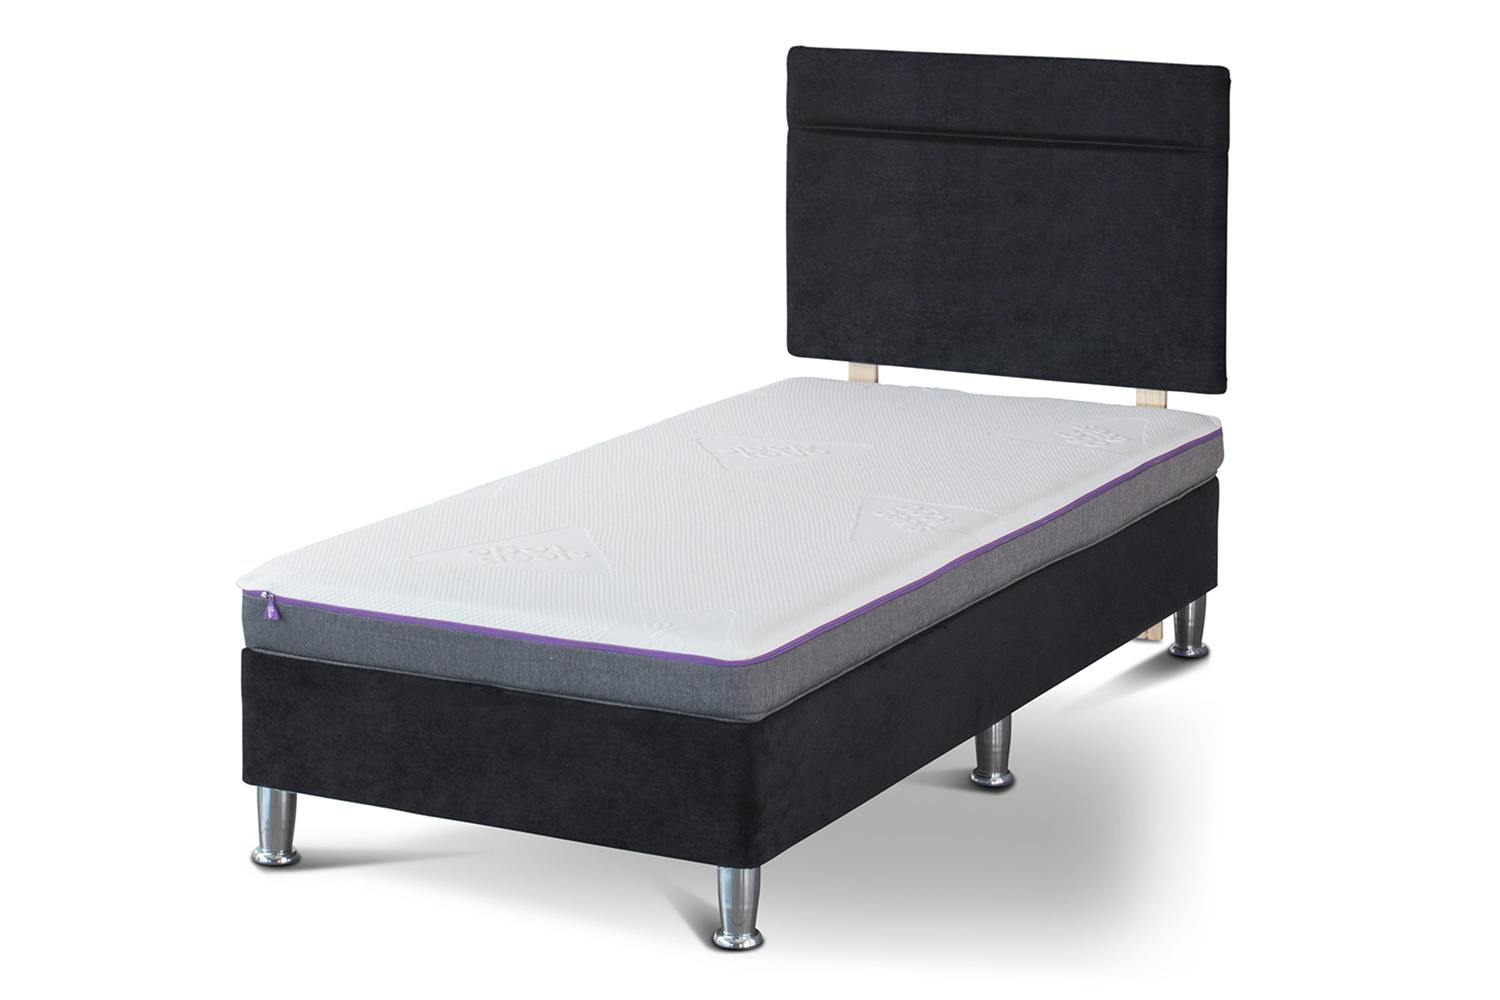 6ft beds with mattress